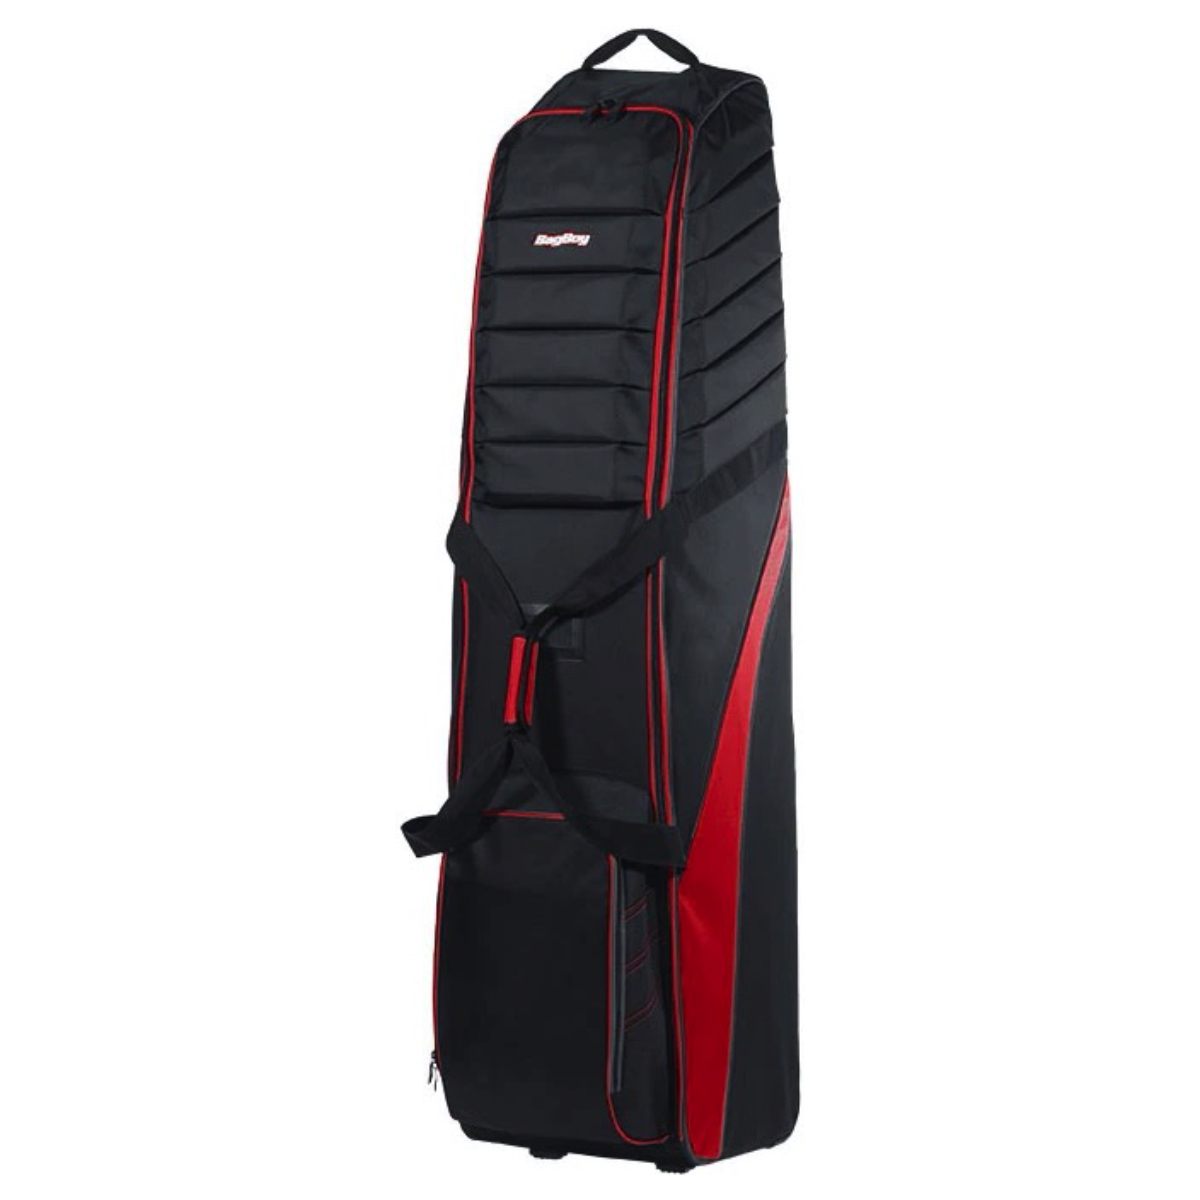 Bag Boy T750 Black/Red Travelcover